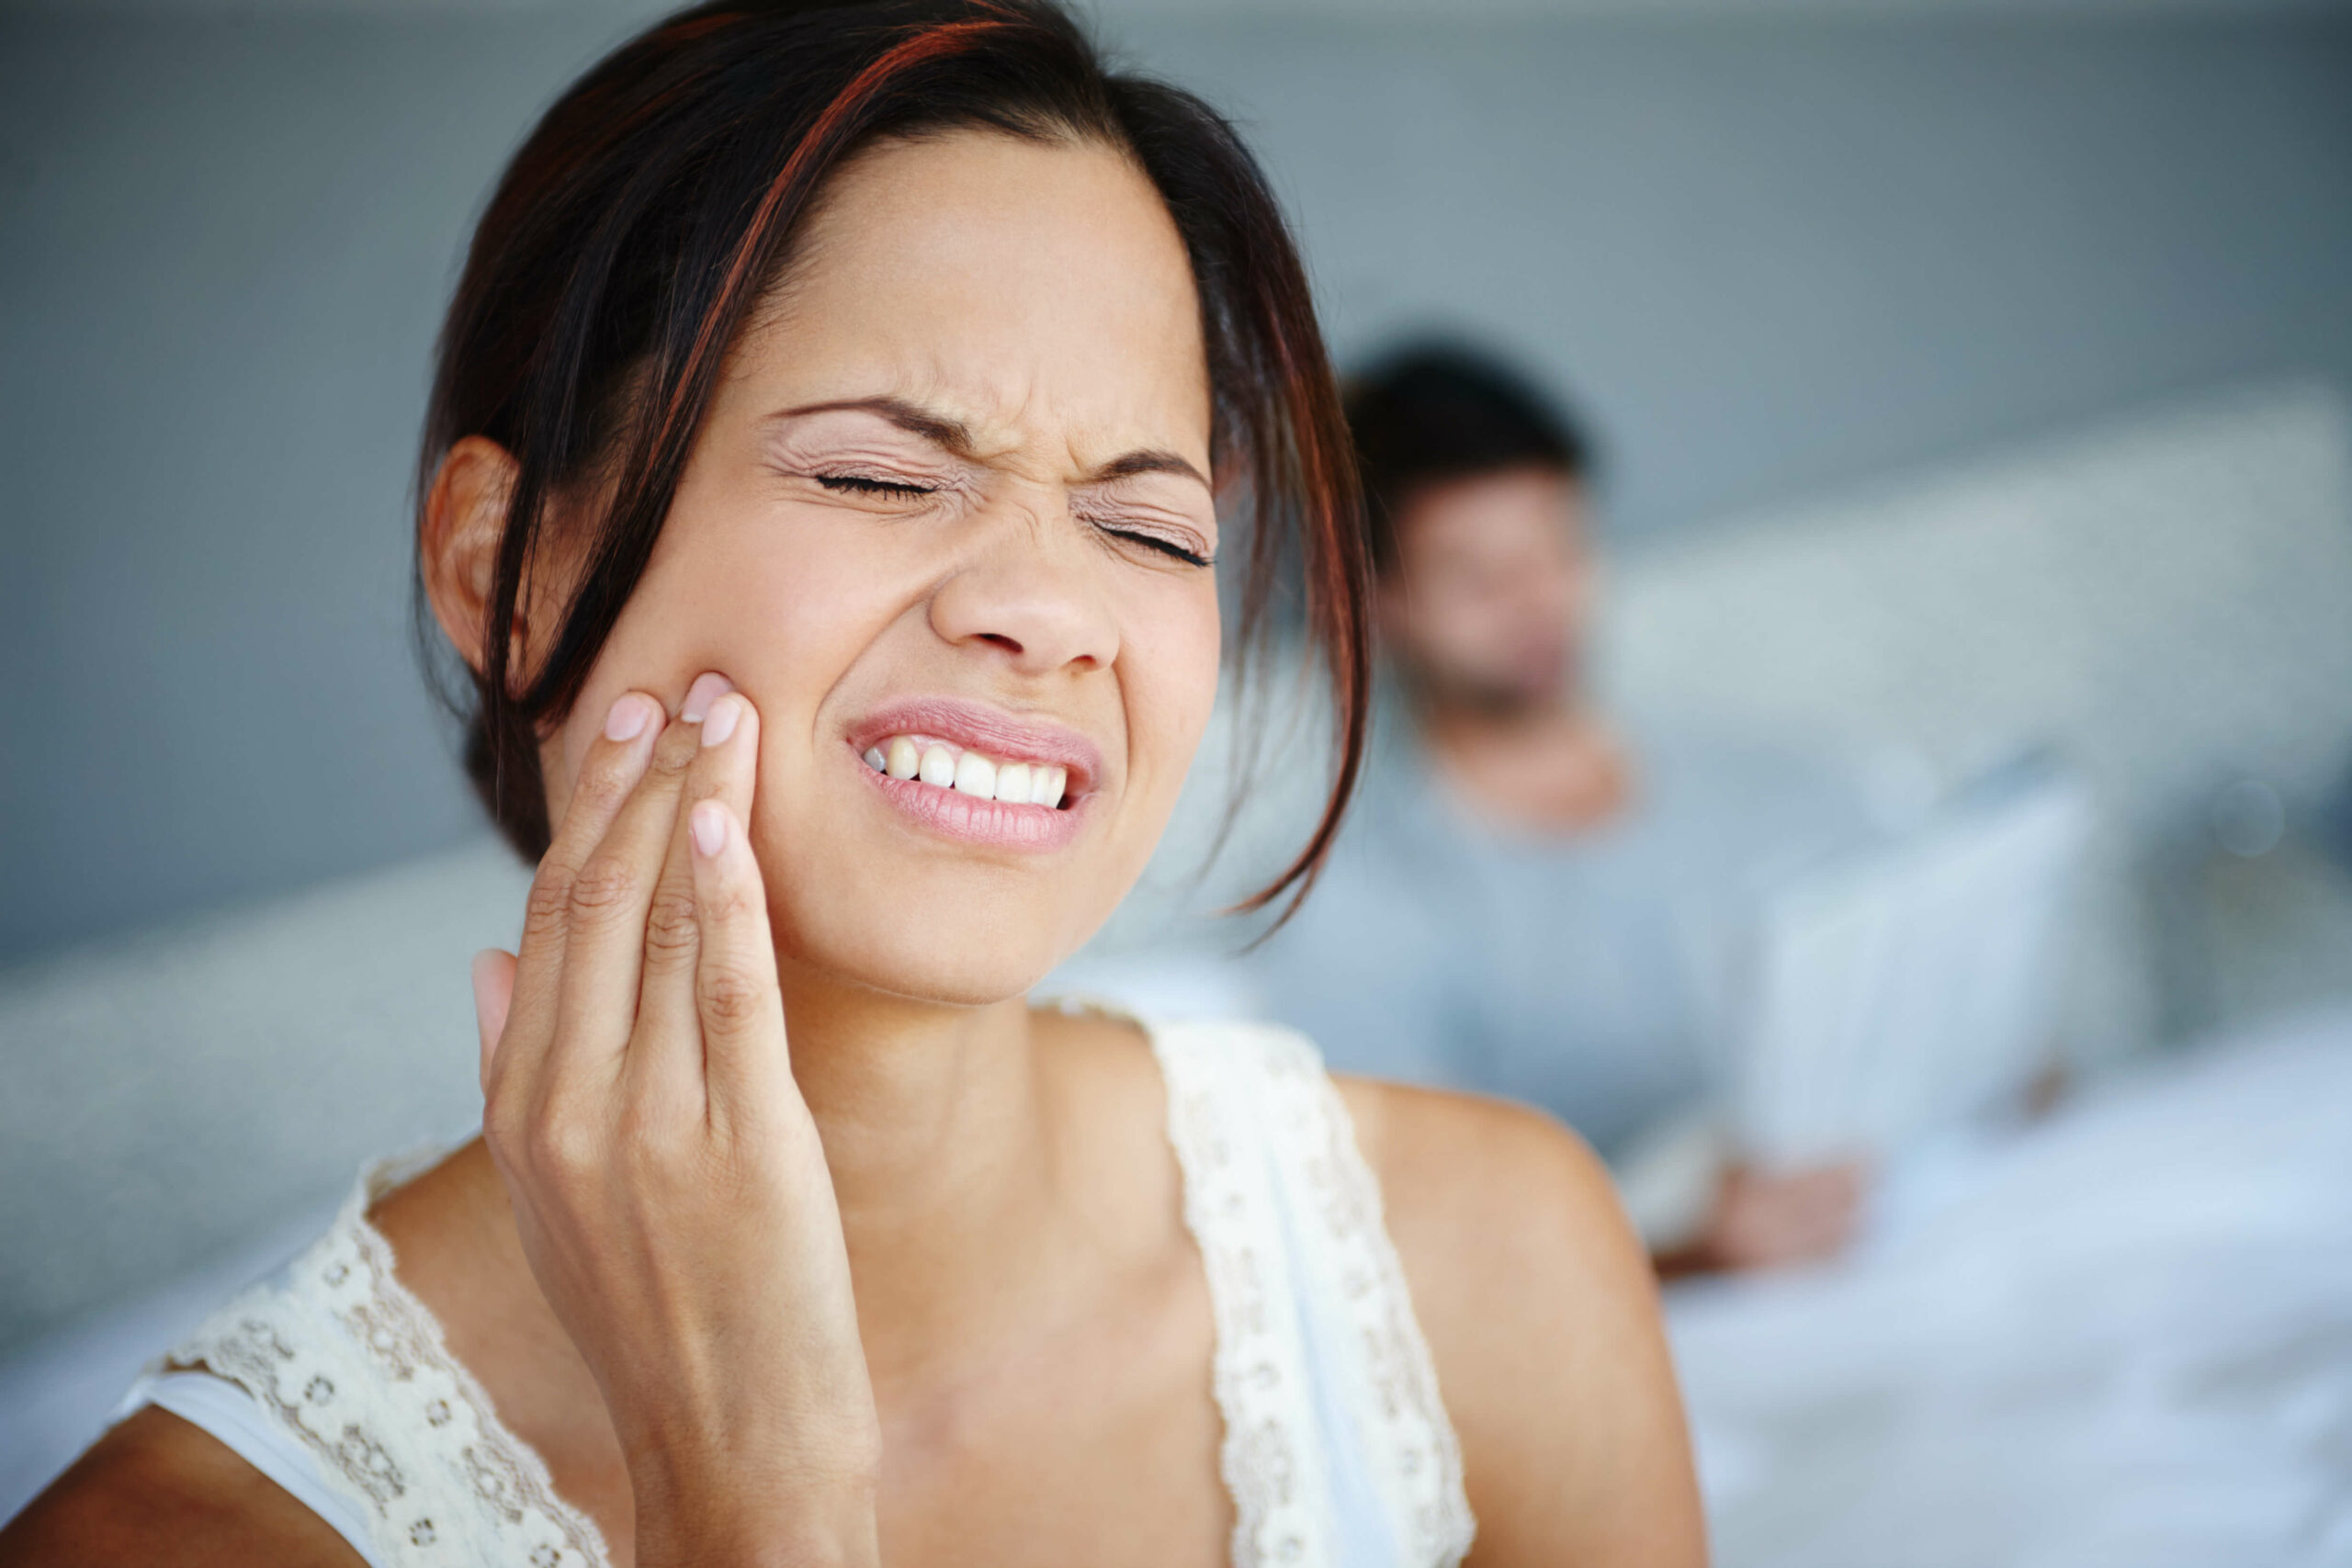 Featured image for “Dental Emergency Toothache Relief”